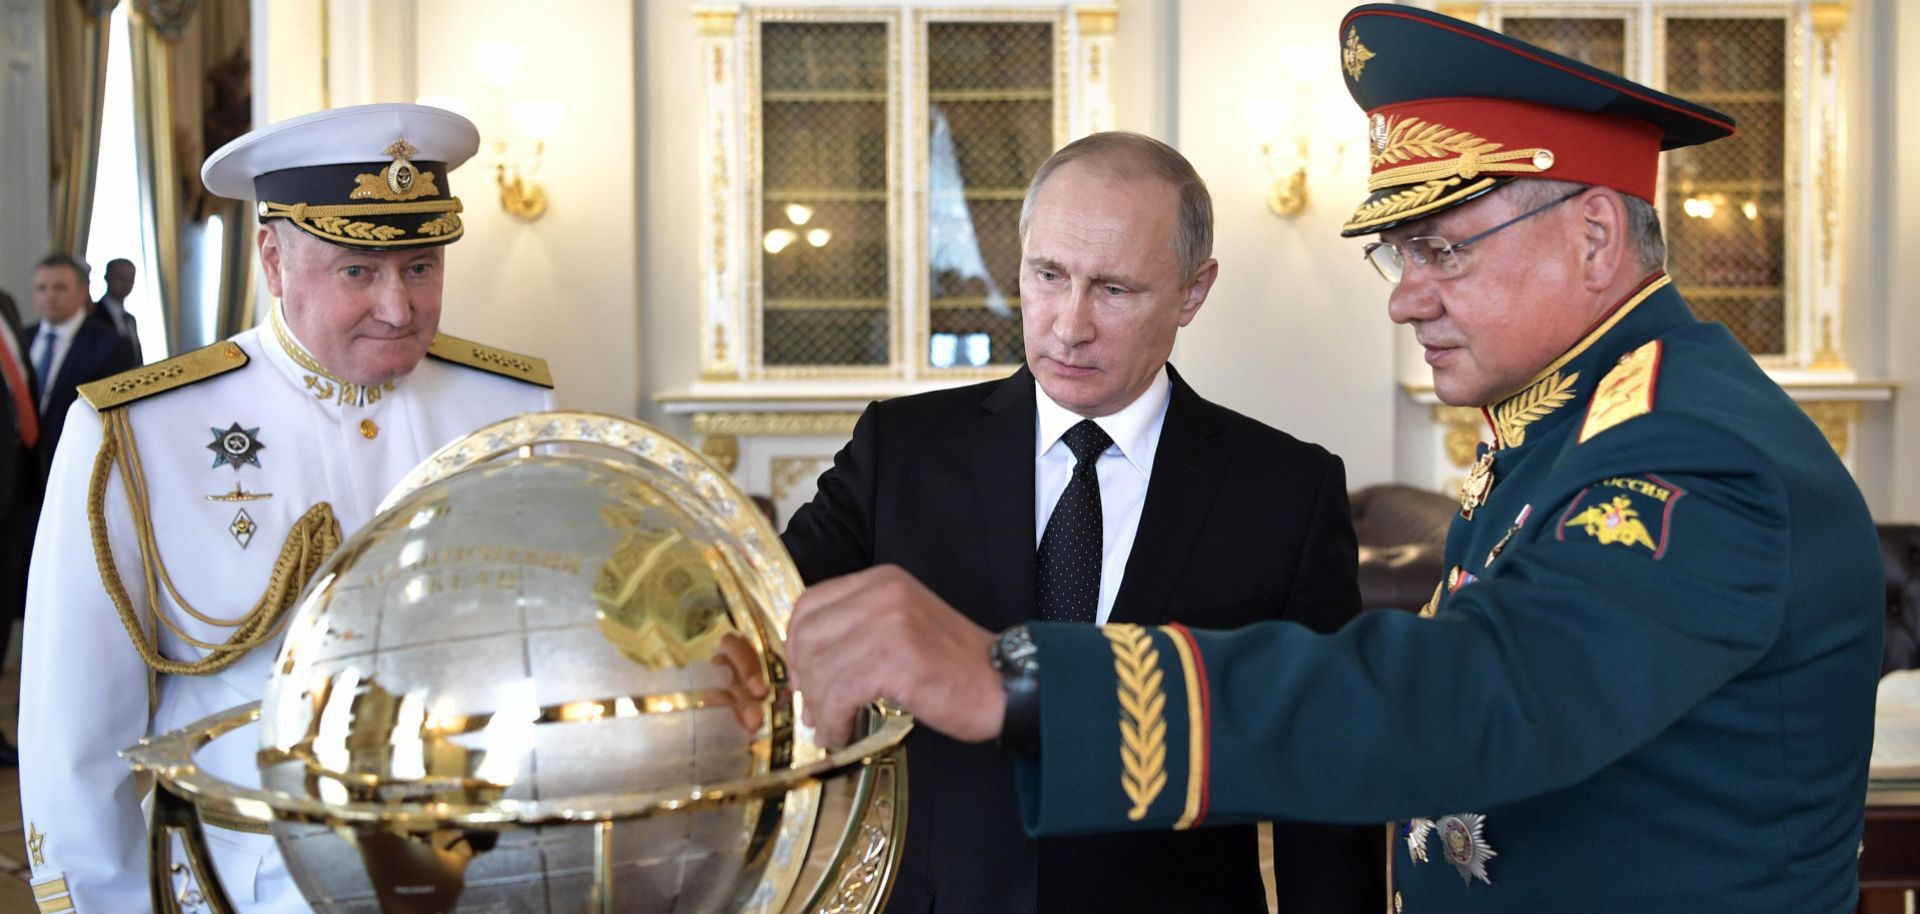 Russian President Vladimir Putin (C) and Defense Minister Sergei Shoigu visit the headquarters of the Russian navy in 2017.